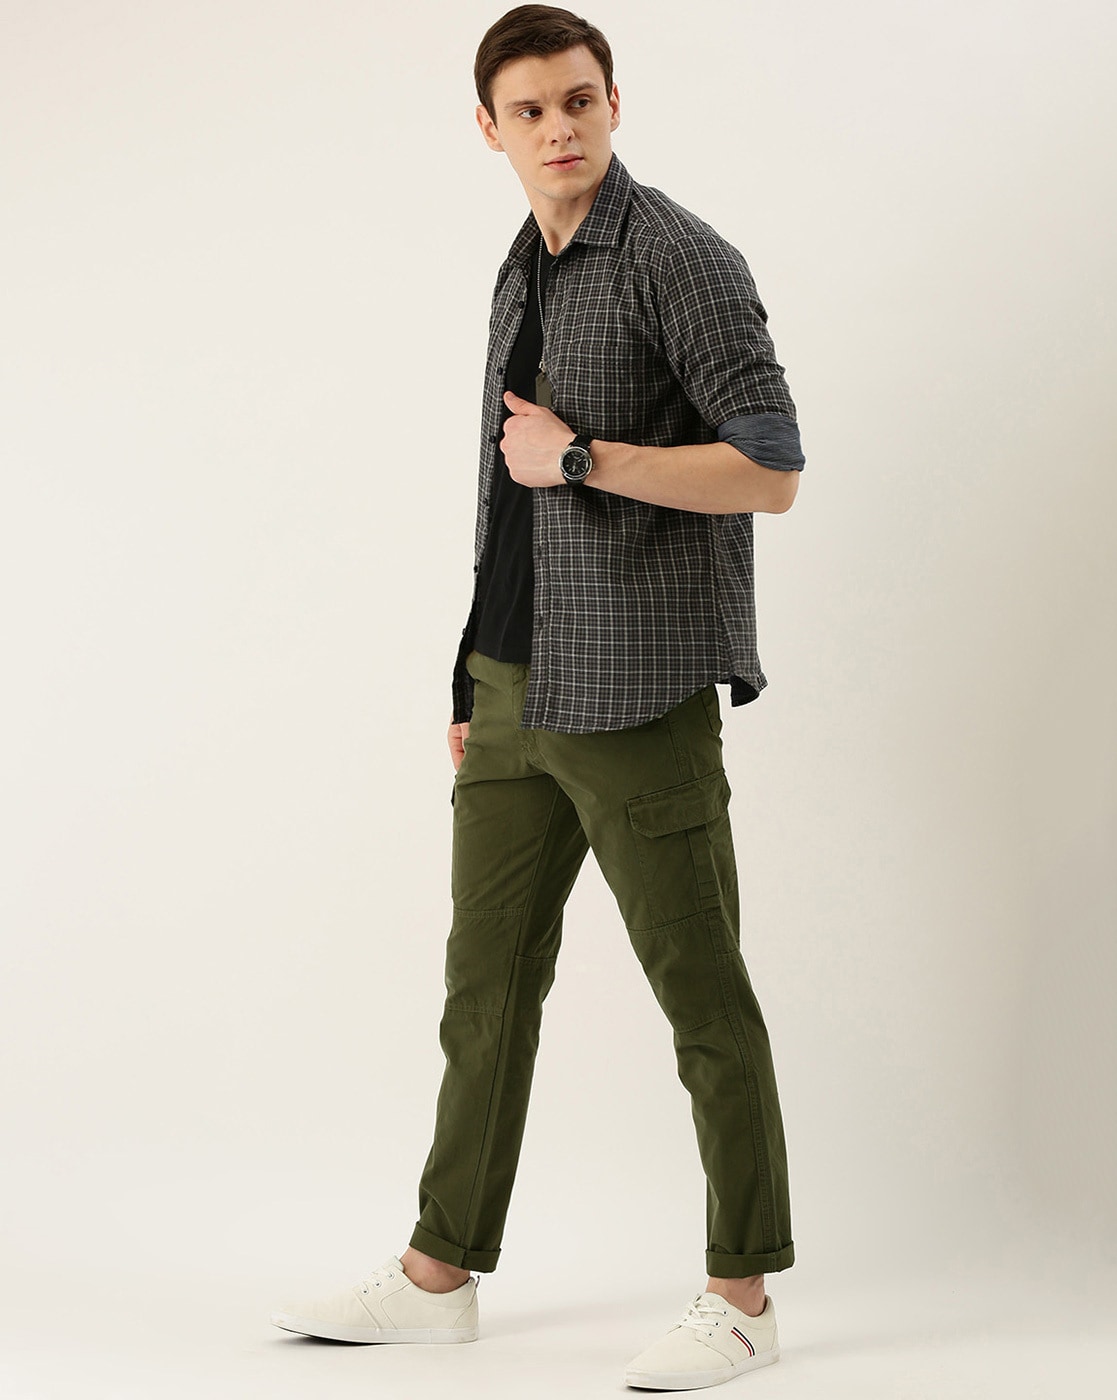 Green Pants with Shirt Casual Outfits For Men (36 ideas & outfits) |  Lookastic